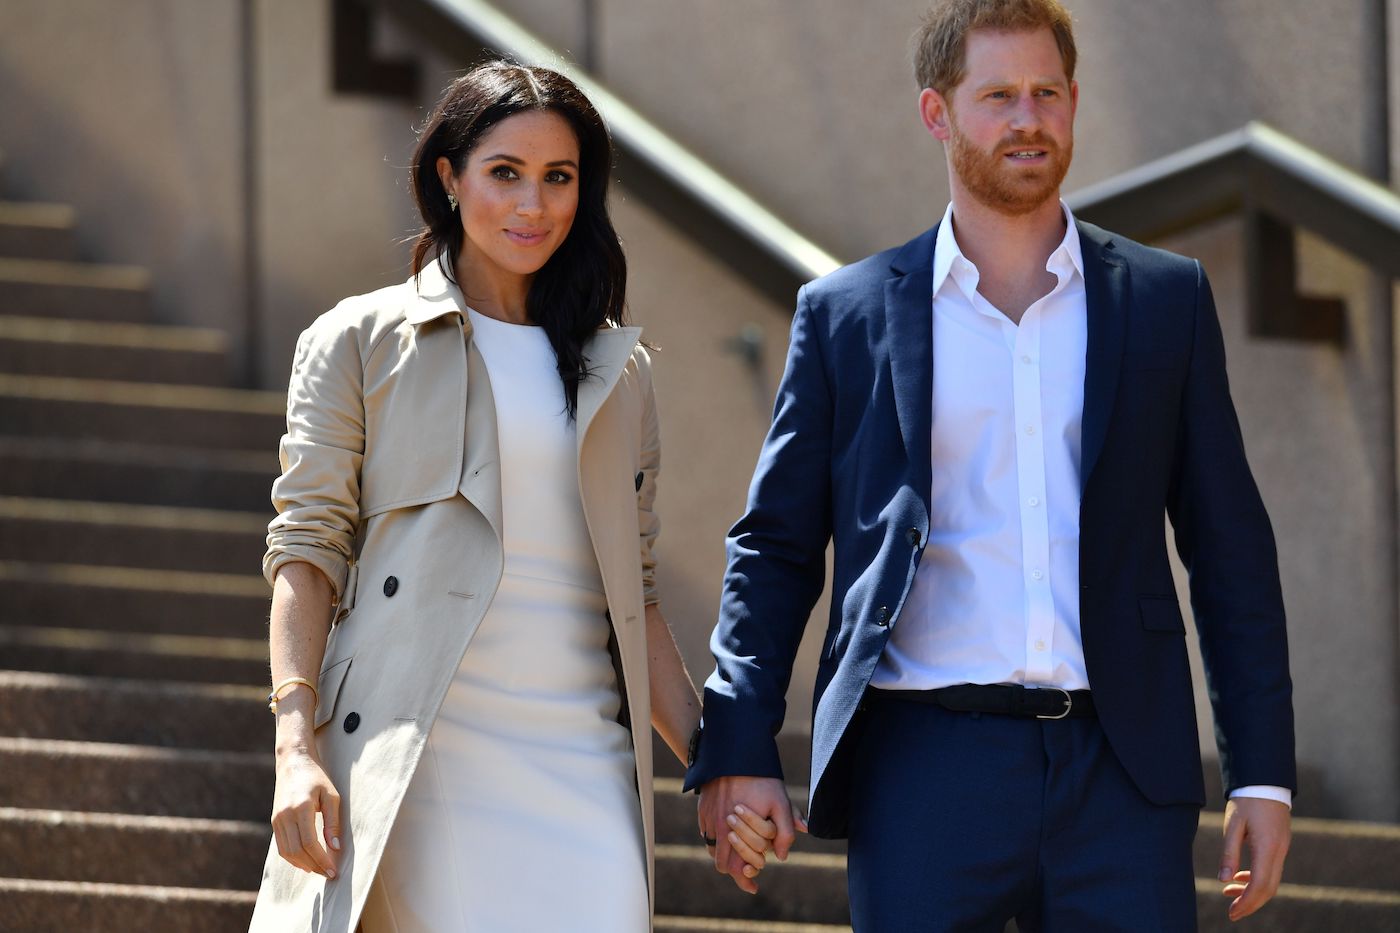 Meghan Markle and Prince Harry hold hands walking down the steps of the Sydney Opera House